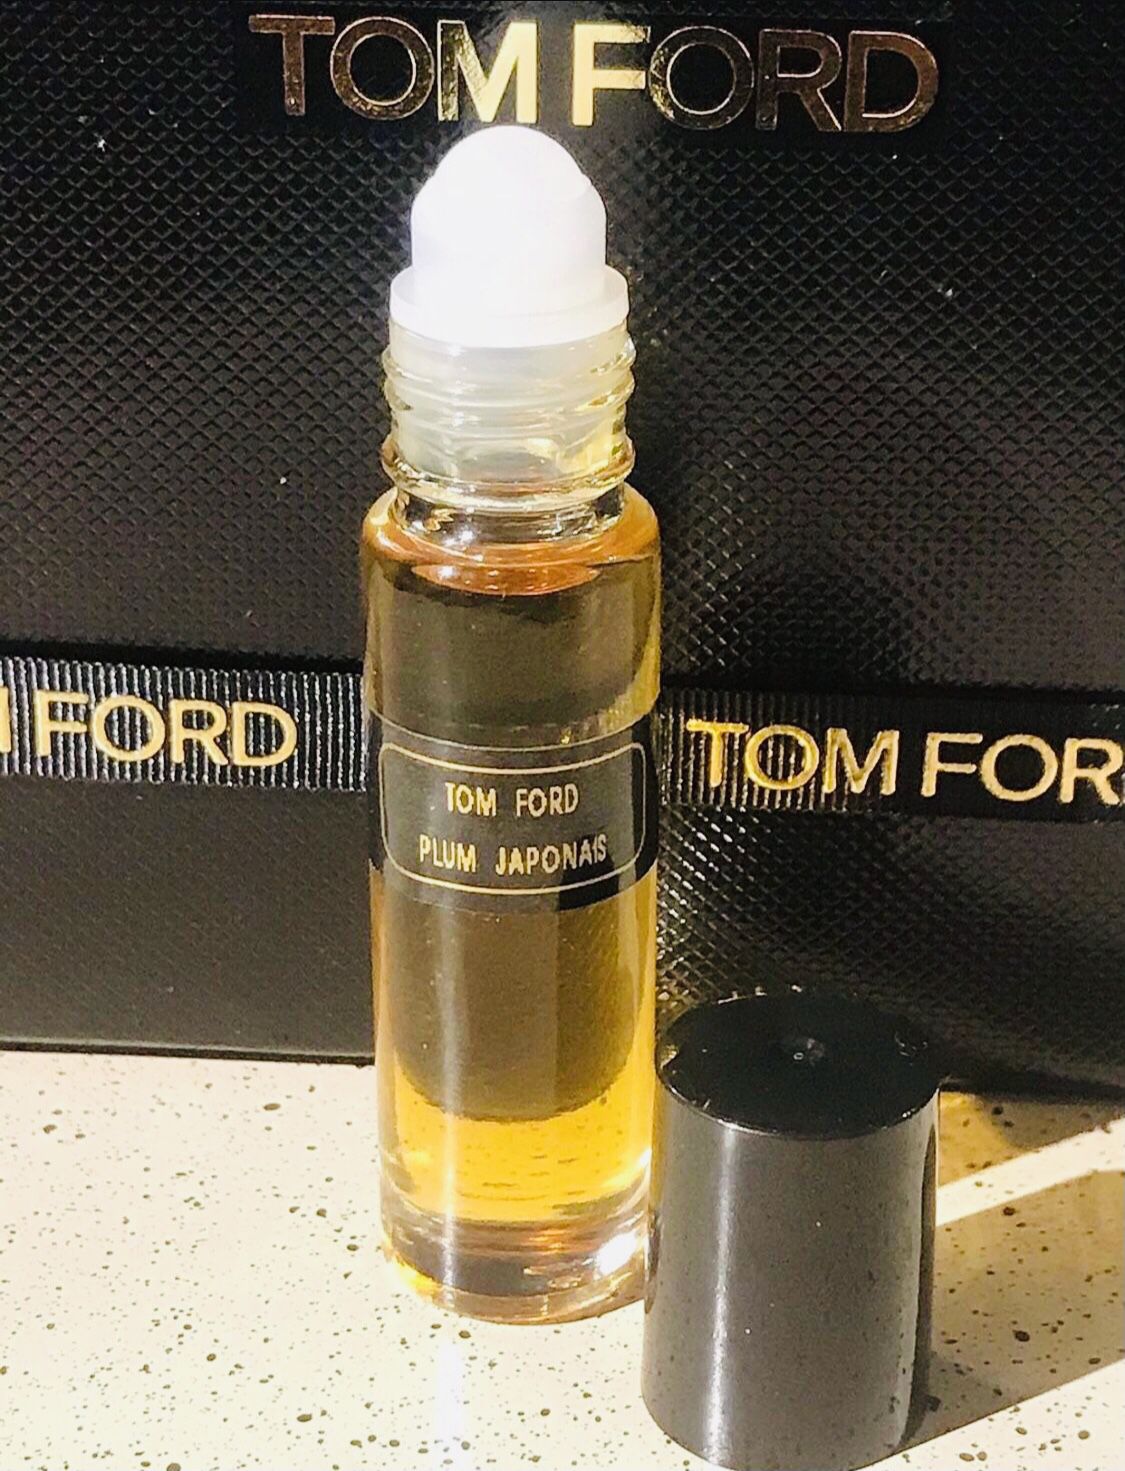 Plum JAPONAIS Tom Ford 10ml Type Perfume Body Oil Roll On DISCONTINUED Fragrance Limited Supply Just A Few Left 